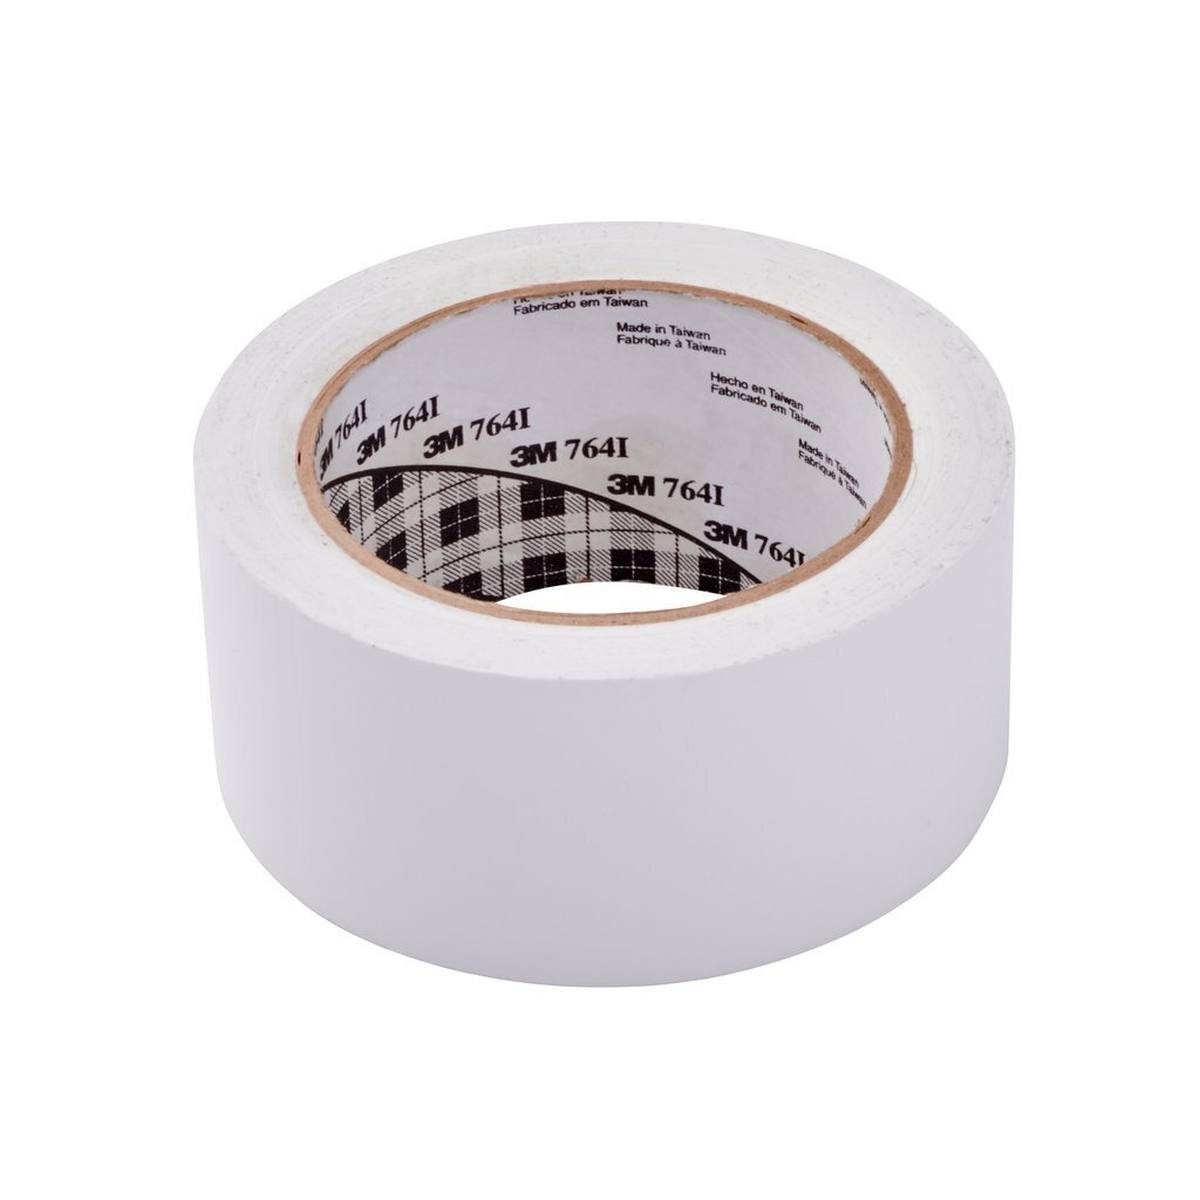 3M all-purpose PVC adhesive tape 764, white, 50 mm x 33 m, individually packed for convenience